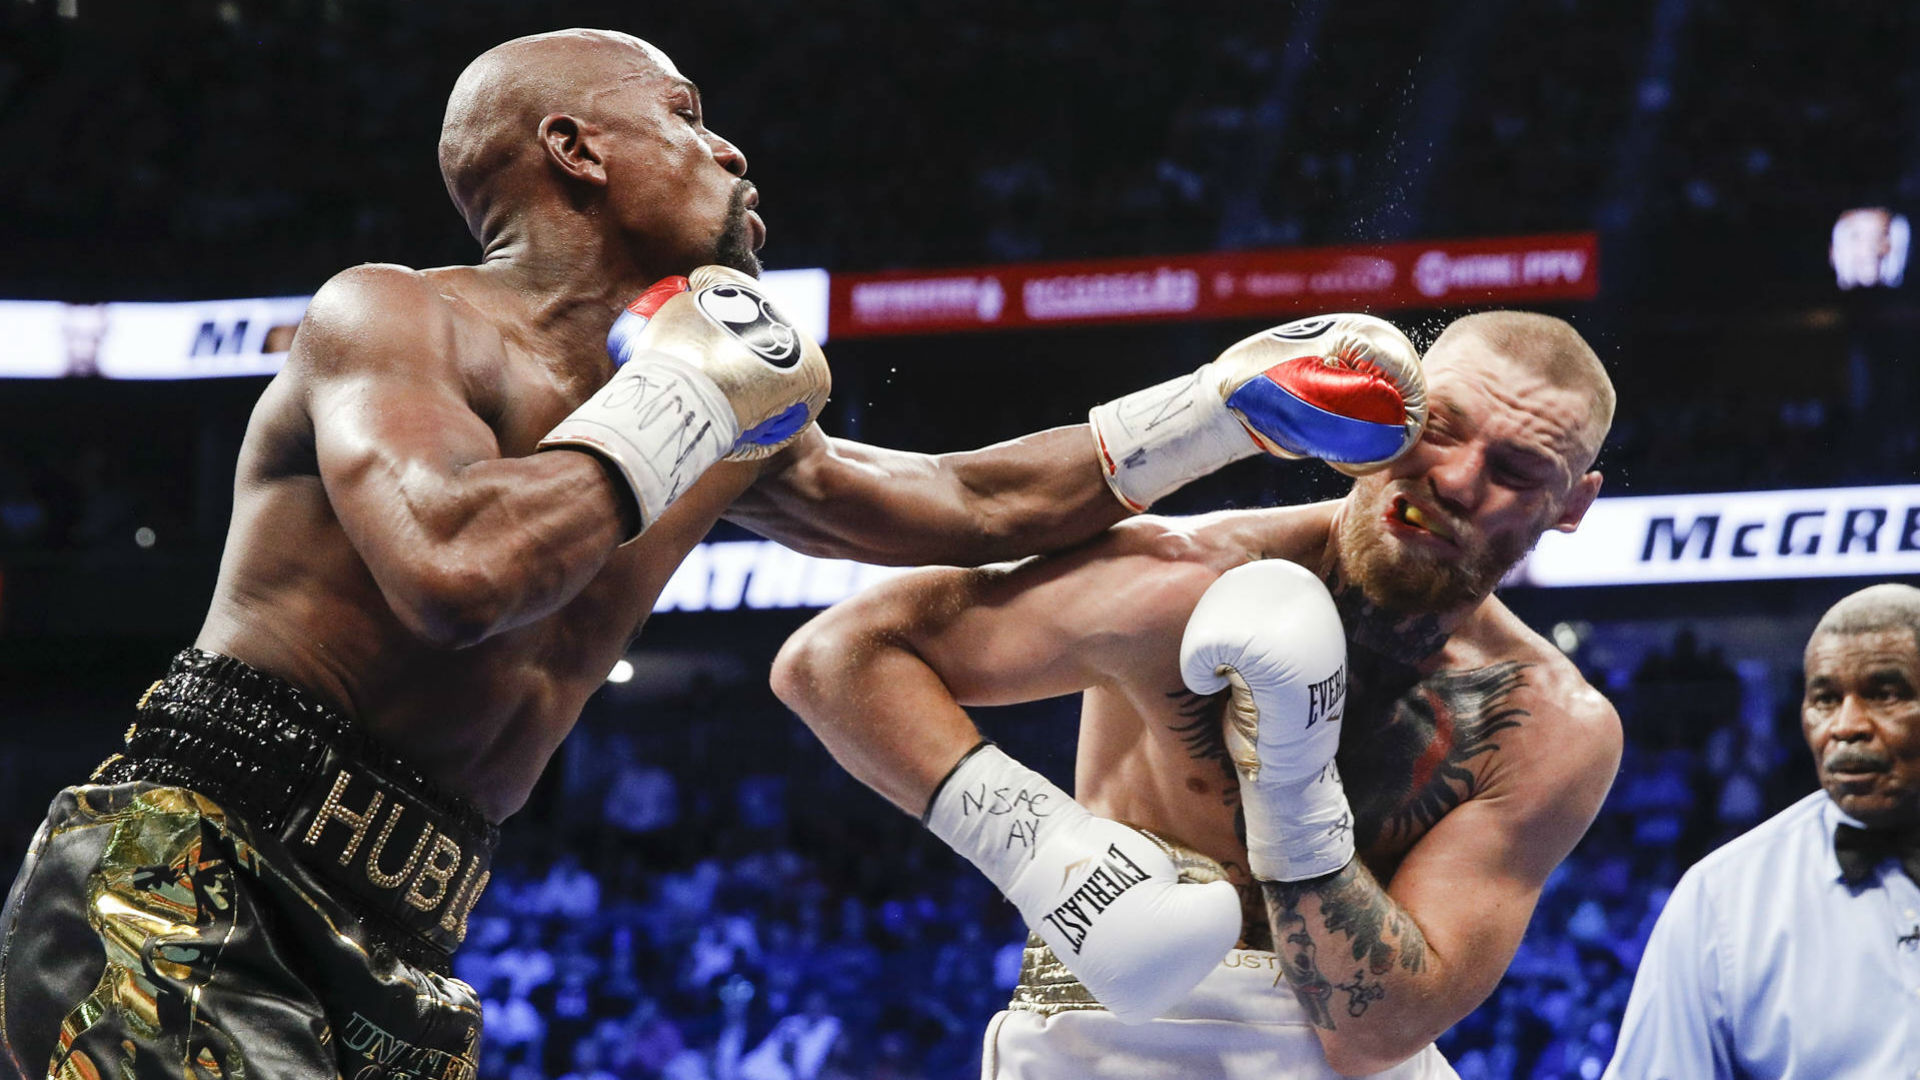 Mayweather vs. McGregor: Floyd Mayweather's 50-0 record comes with an asterisk ...